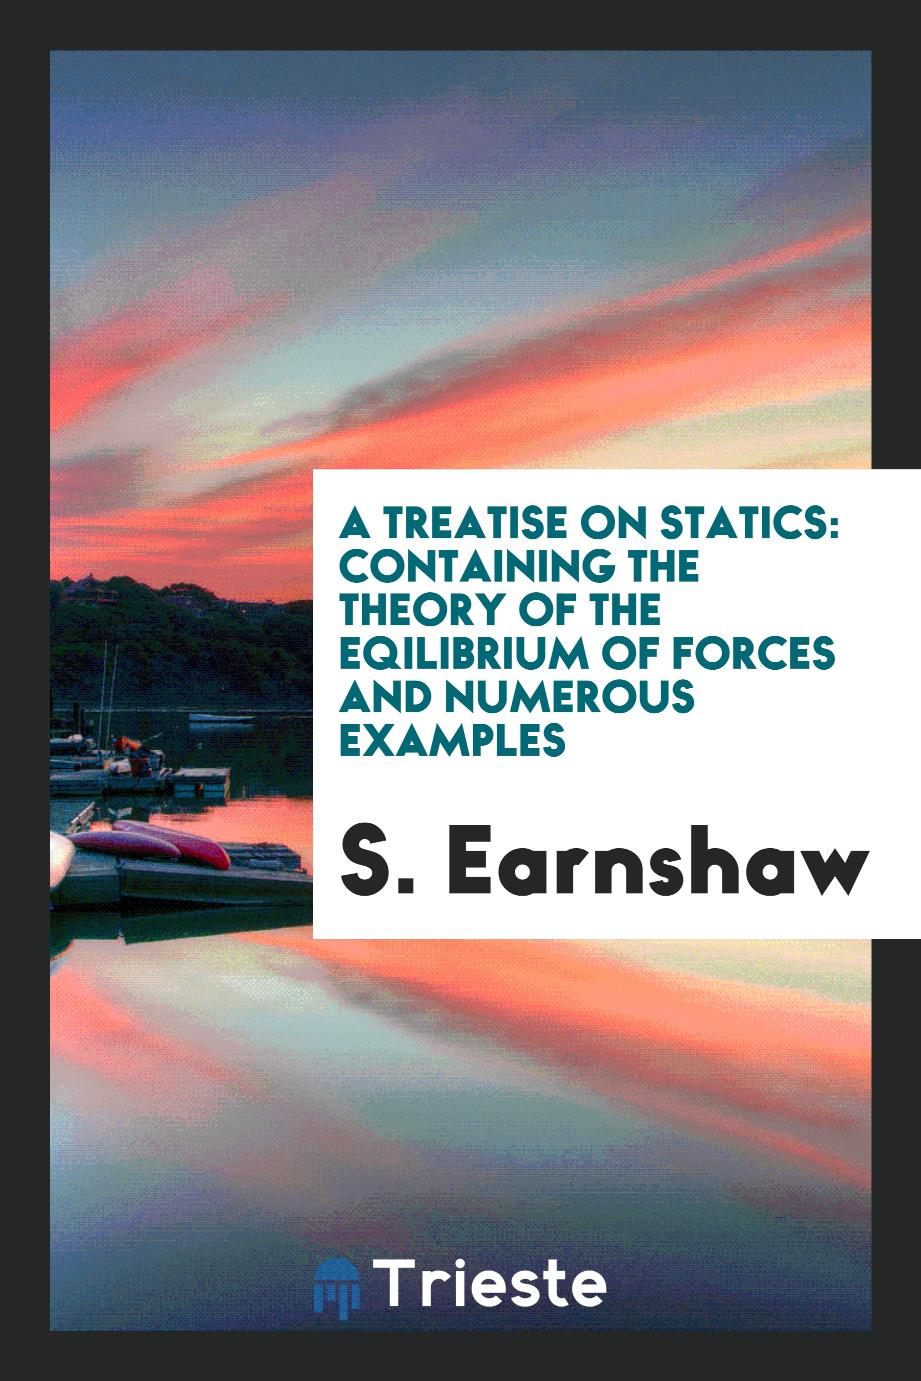 A Treatise on Statics: Containing the Theory of the Eqilibrium of Forces and Numerous Examples